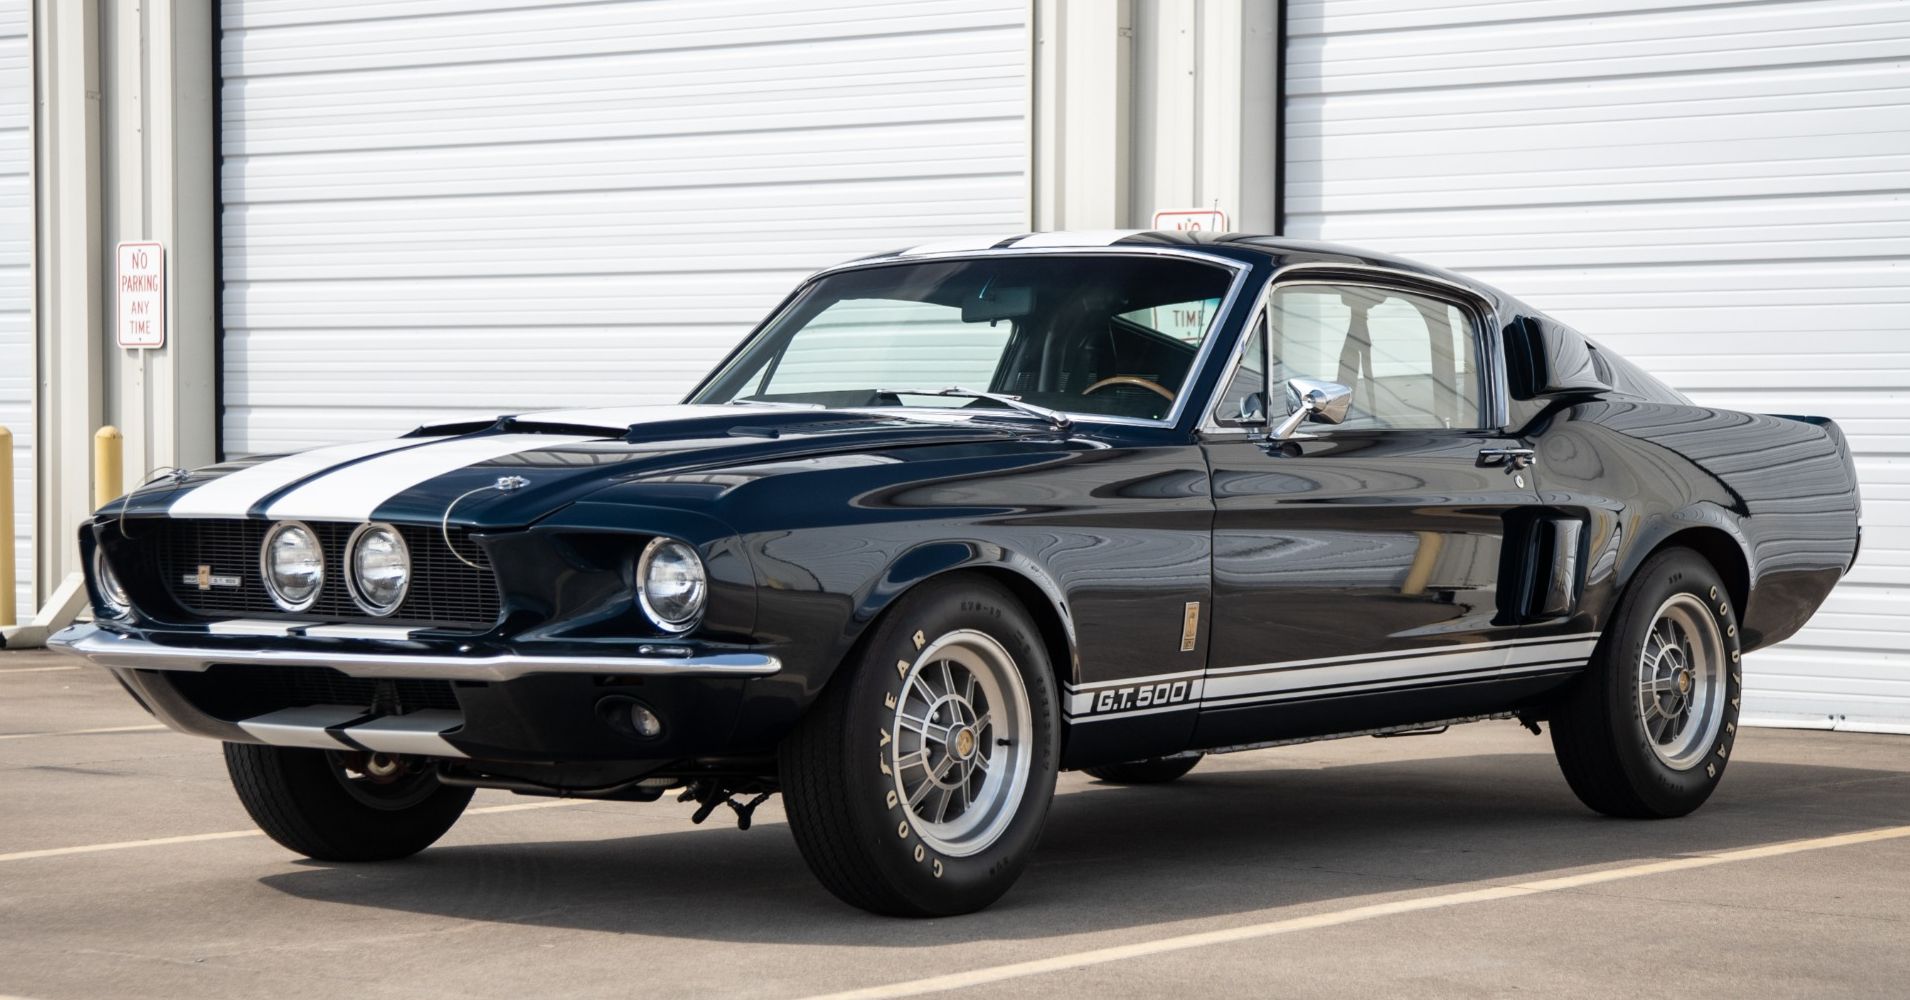 The 1967 Ford Mustang Shelby Gt500 Is The Most Beautiful Muscle Car